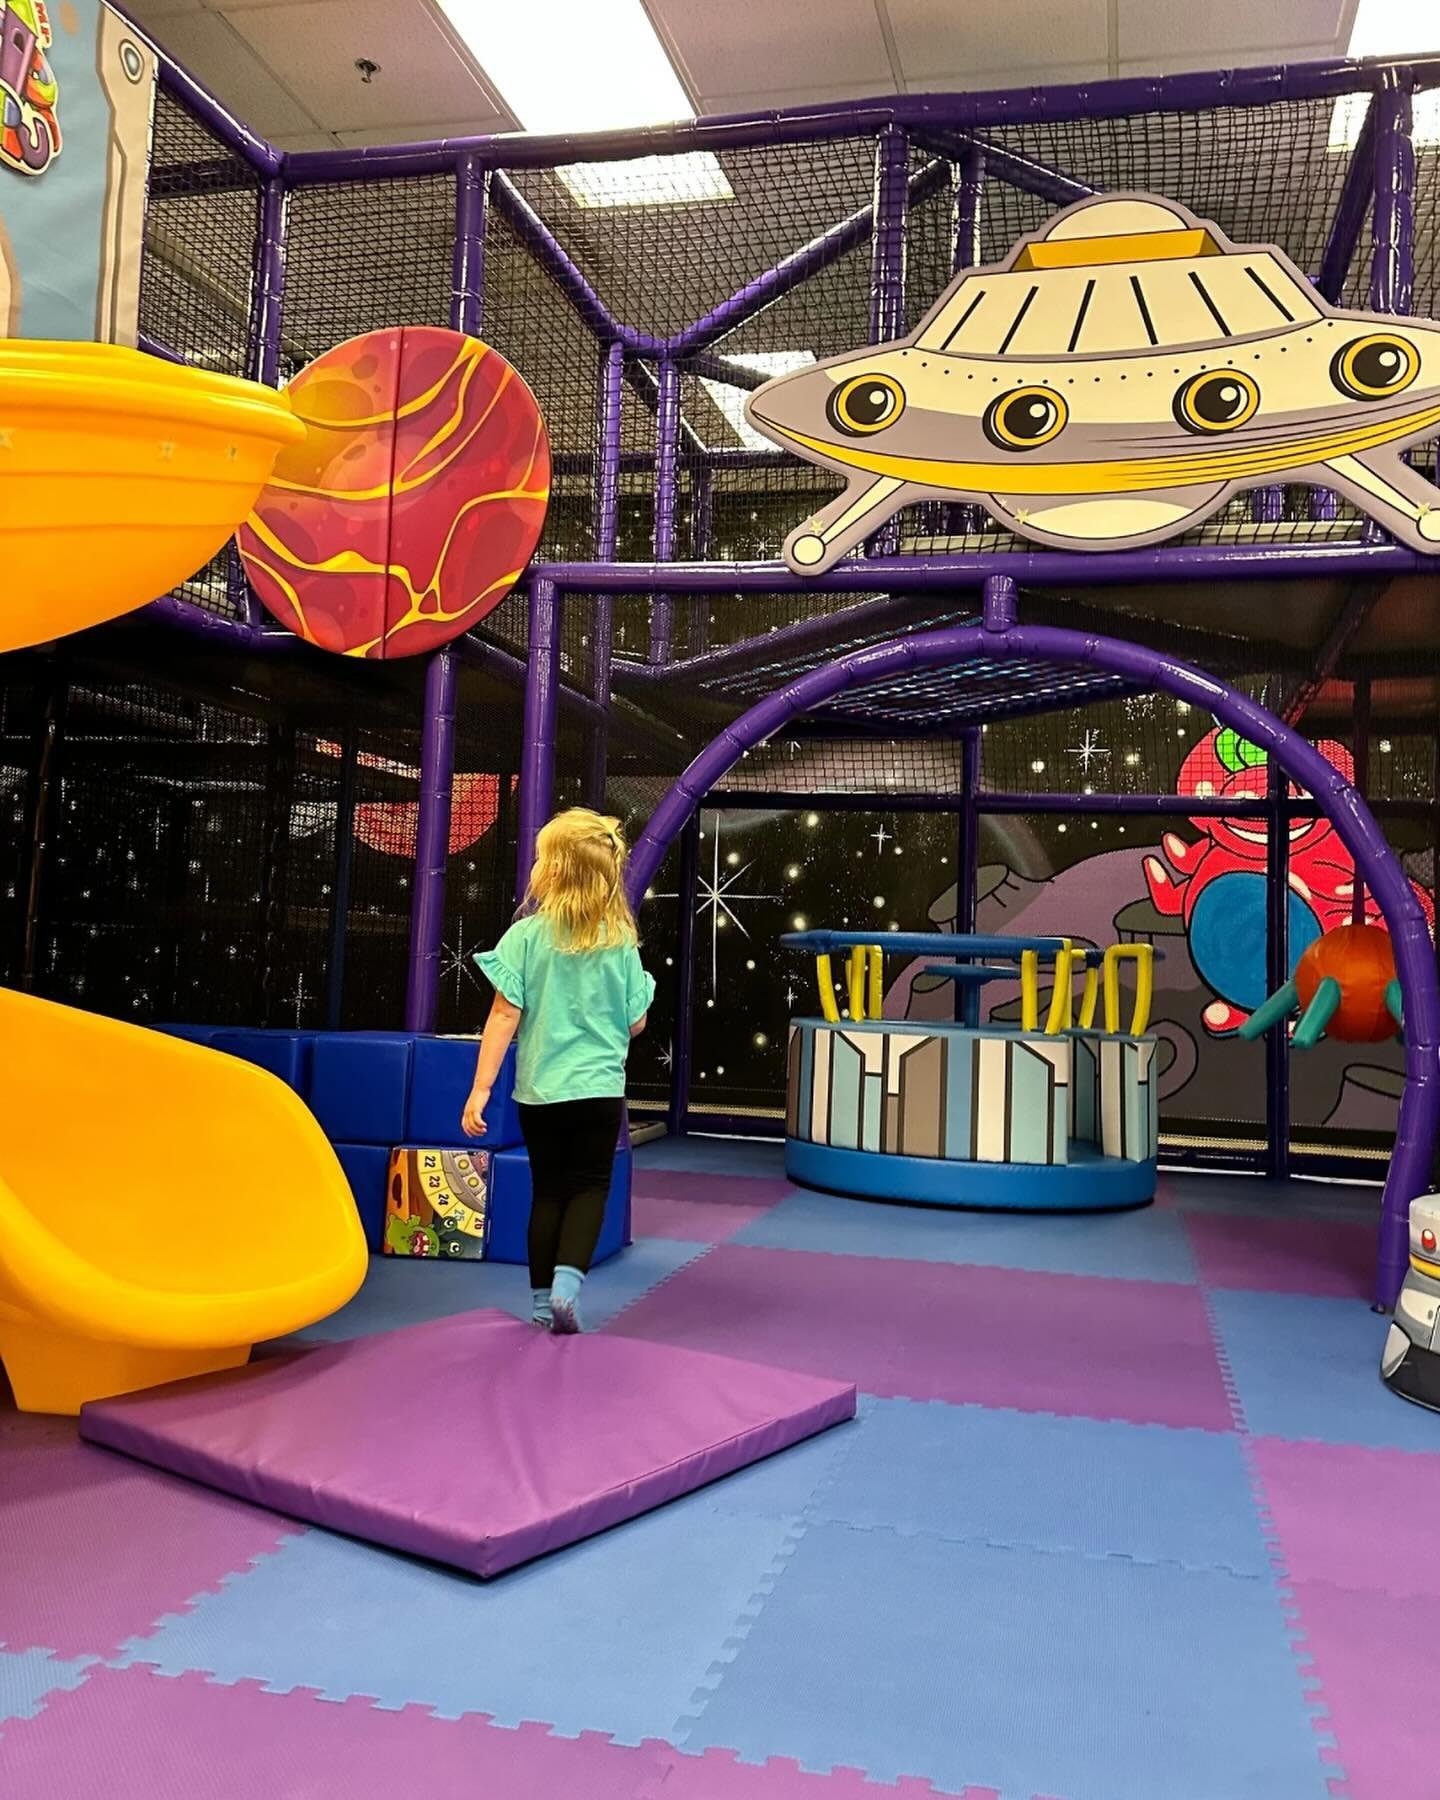 10 Indoor Play Places in the KC Metro 🌟

Kansas City has over 10 amazing spots for indoor play with climbing, jumping, crawling, bouncing, and sliding included. Which one of these spots is your family favorite? 

For the full list with all the detai